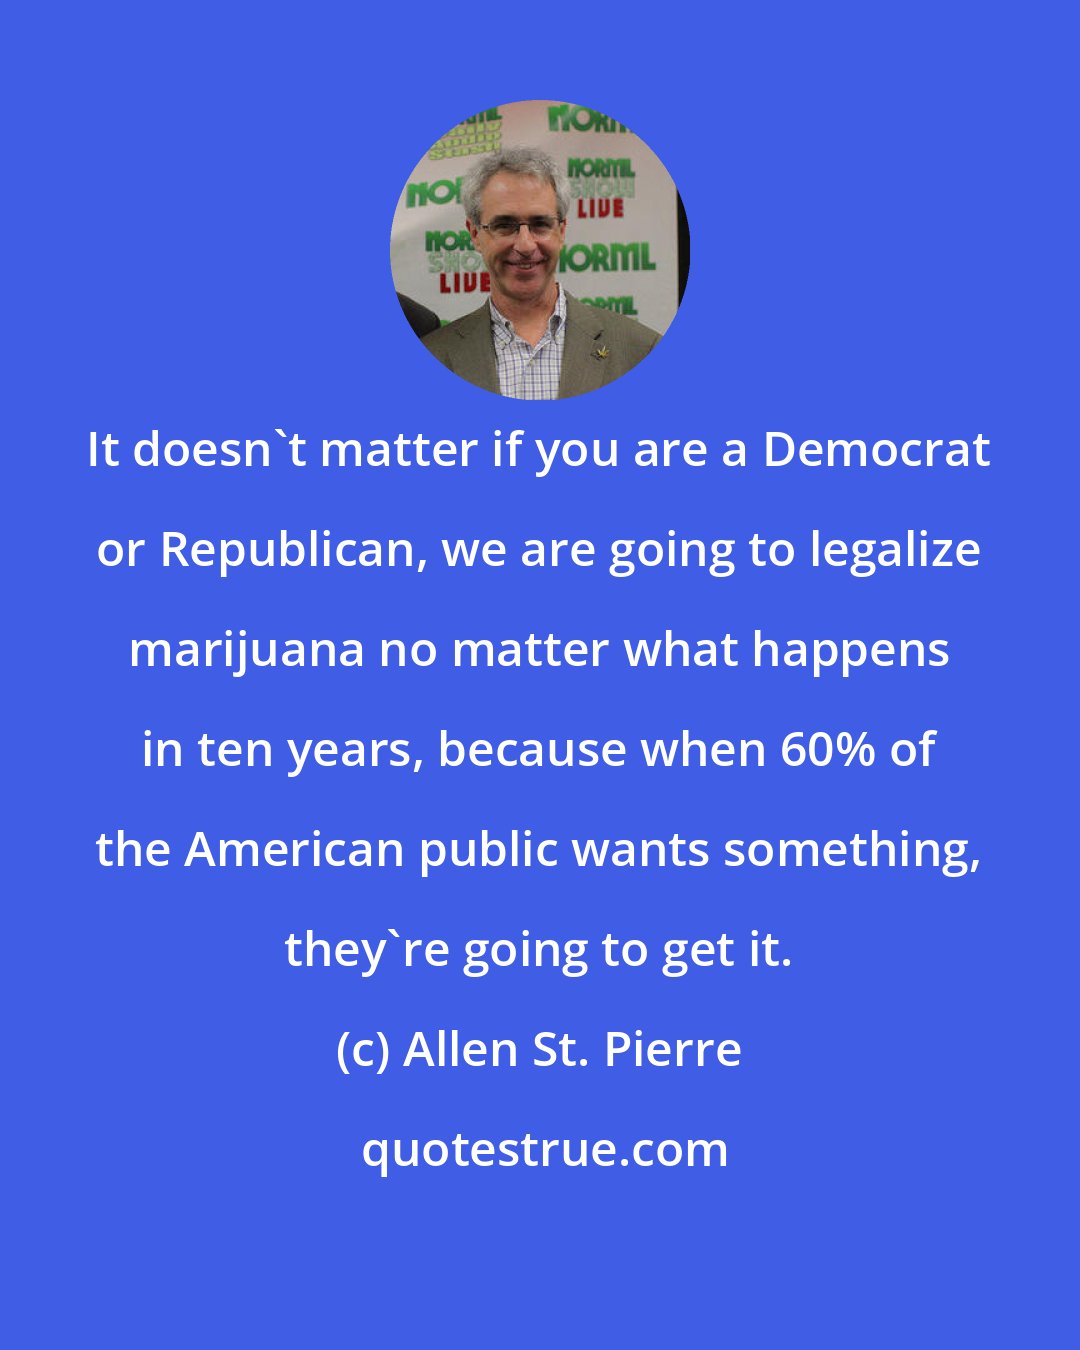 Allen St. Pierre: It doesn't matter if you are a Democrat or Republican, we are going to legalize marijuana no matter what happens in ten years, because when 60% of the American public wants something, they're going to get it.